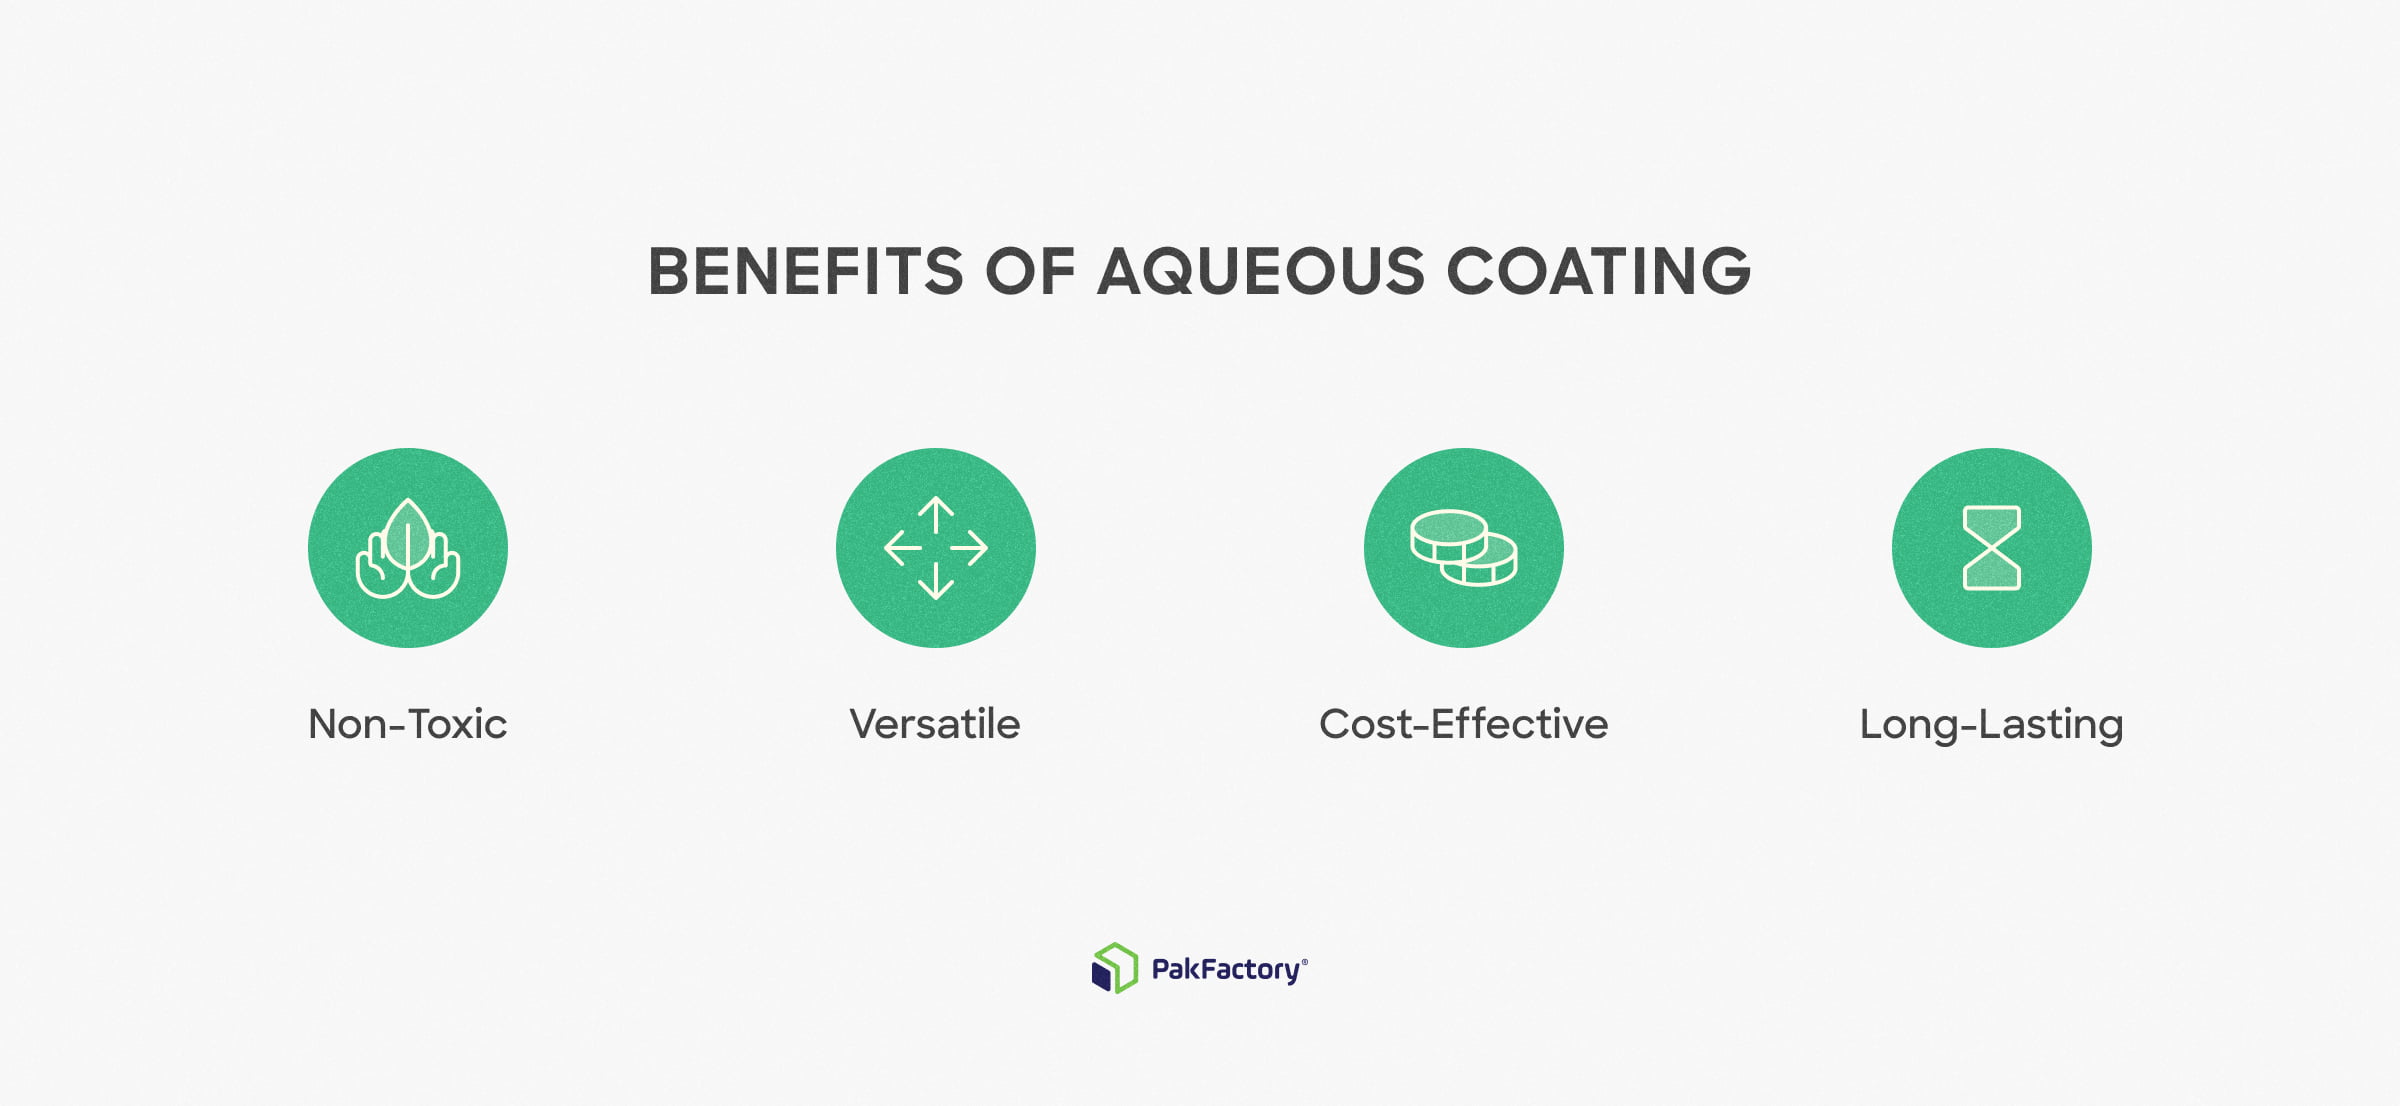 Benefits of using aqueous (aq) coating for your packaging.